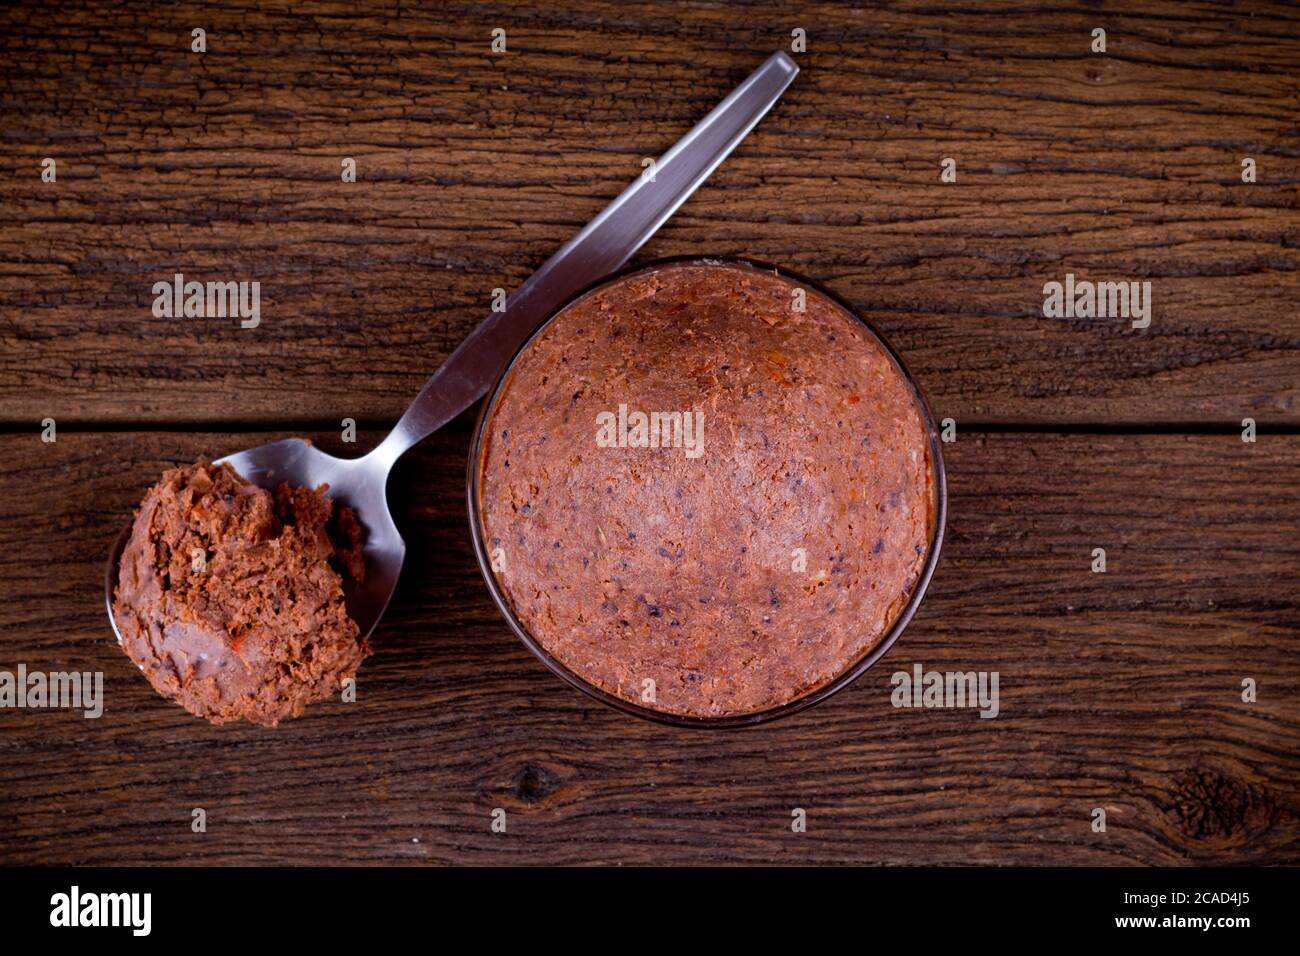 shrimp paste on old wood is popular ingredient in south of thailand Stock Photo